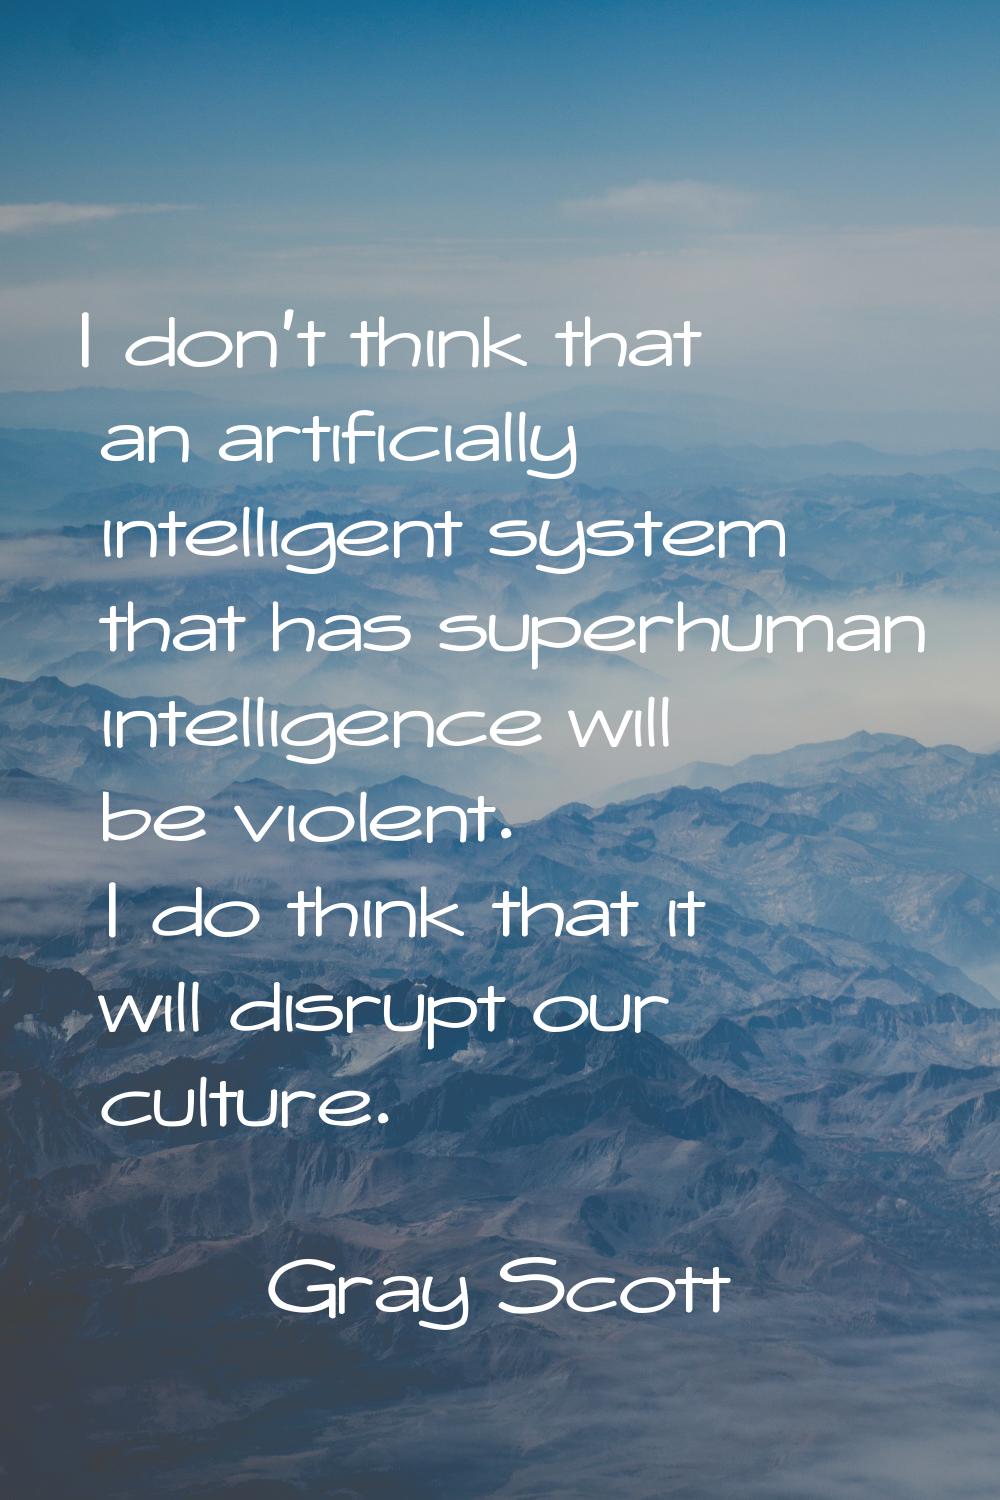 I don't think that an artificially intelligent system that has superhuman intelligence will be viol